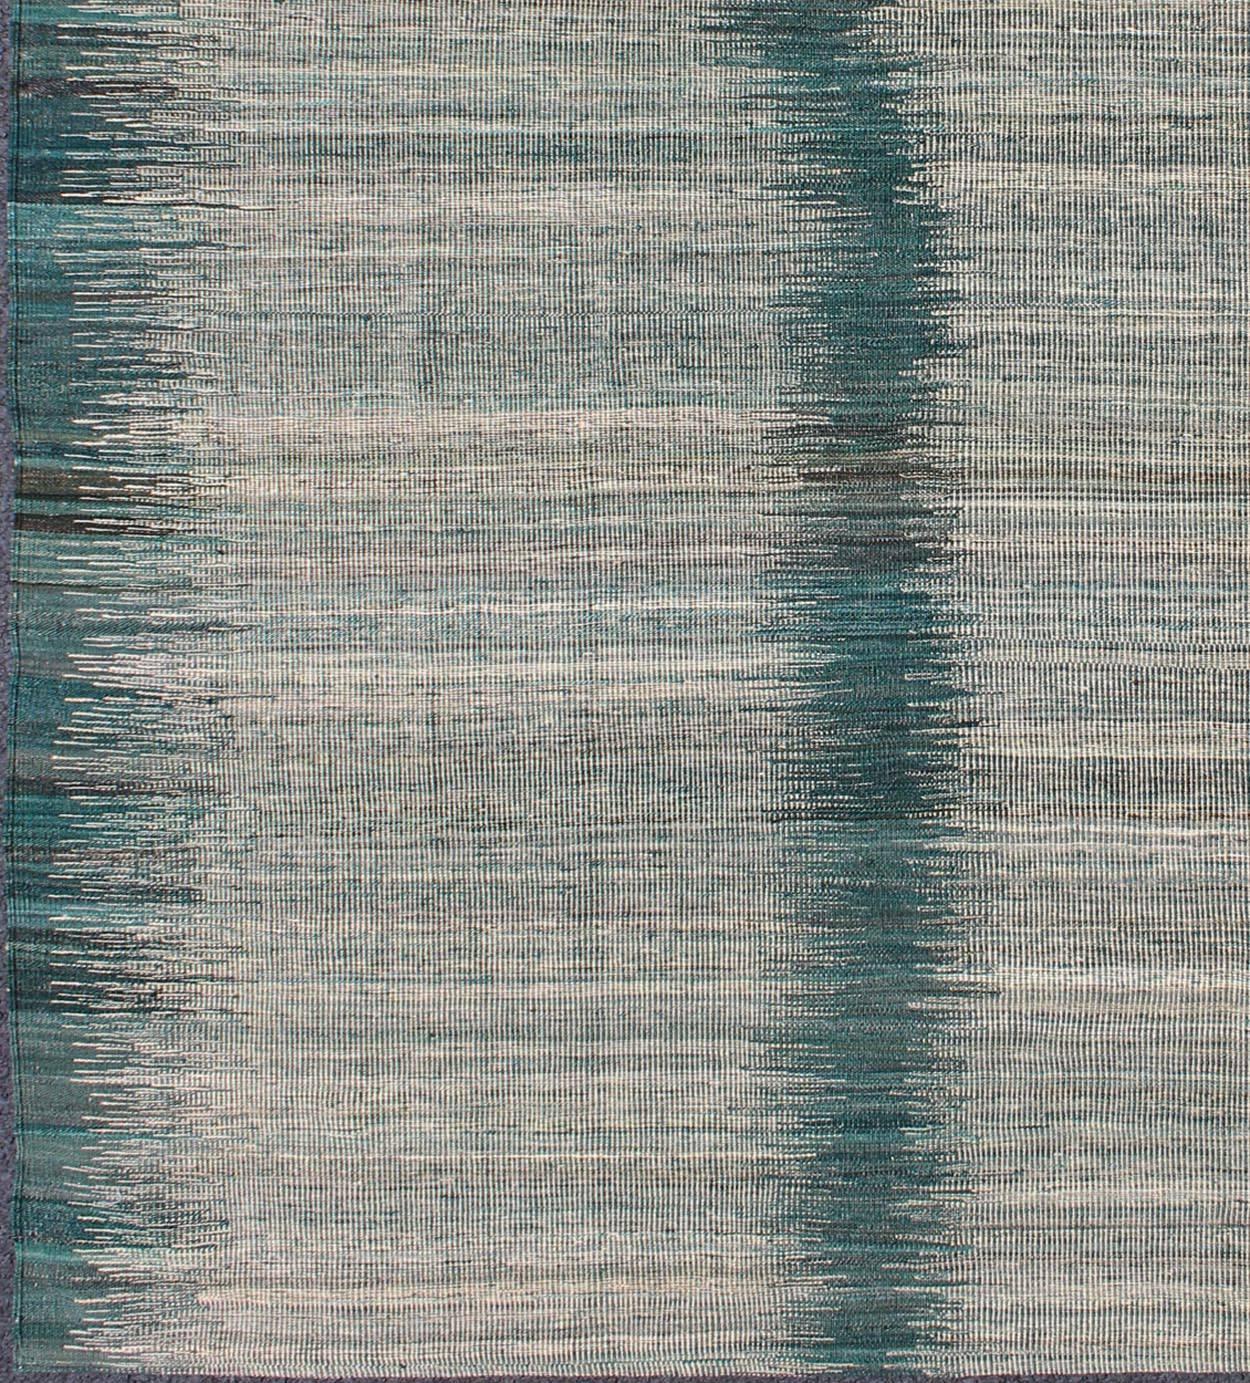 Afghan Modern Kilim rug with vertical strip in White, Cream, gray and teal. Keivan Woven Arts /  rug orn-29700, country of origin / type: Afghanistan / Kilim
Measures: 5'10 x 7'9.
This designer modern Kilim is decorated with a variegated gray,